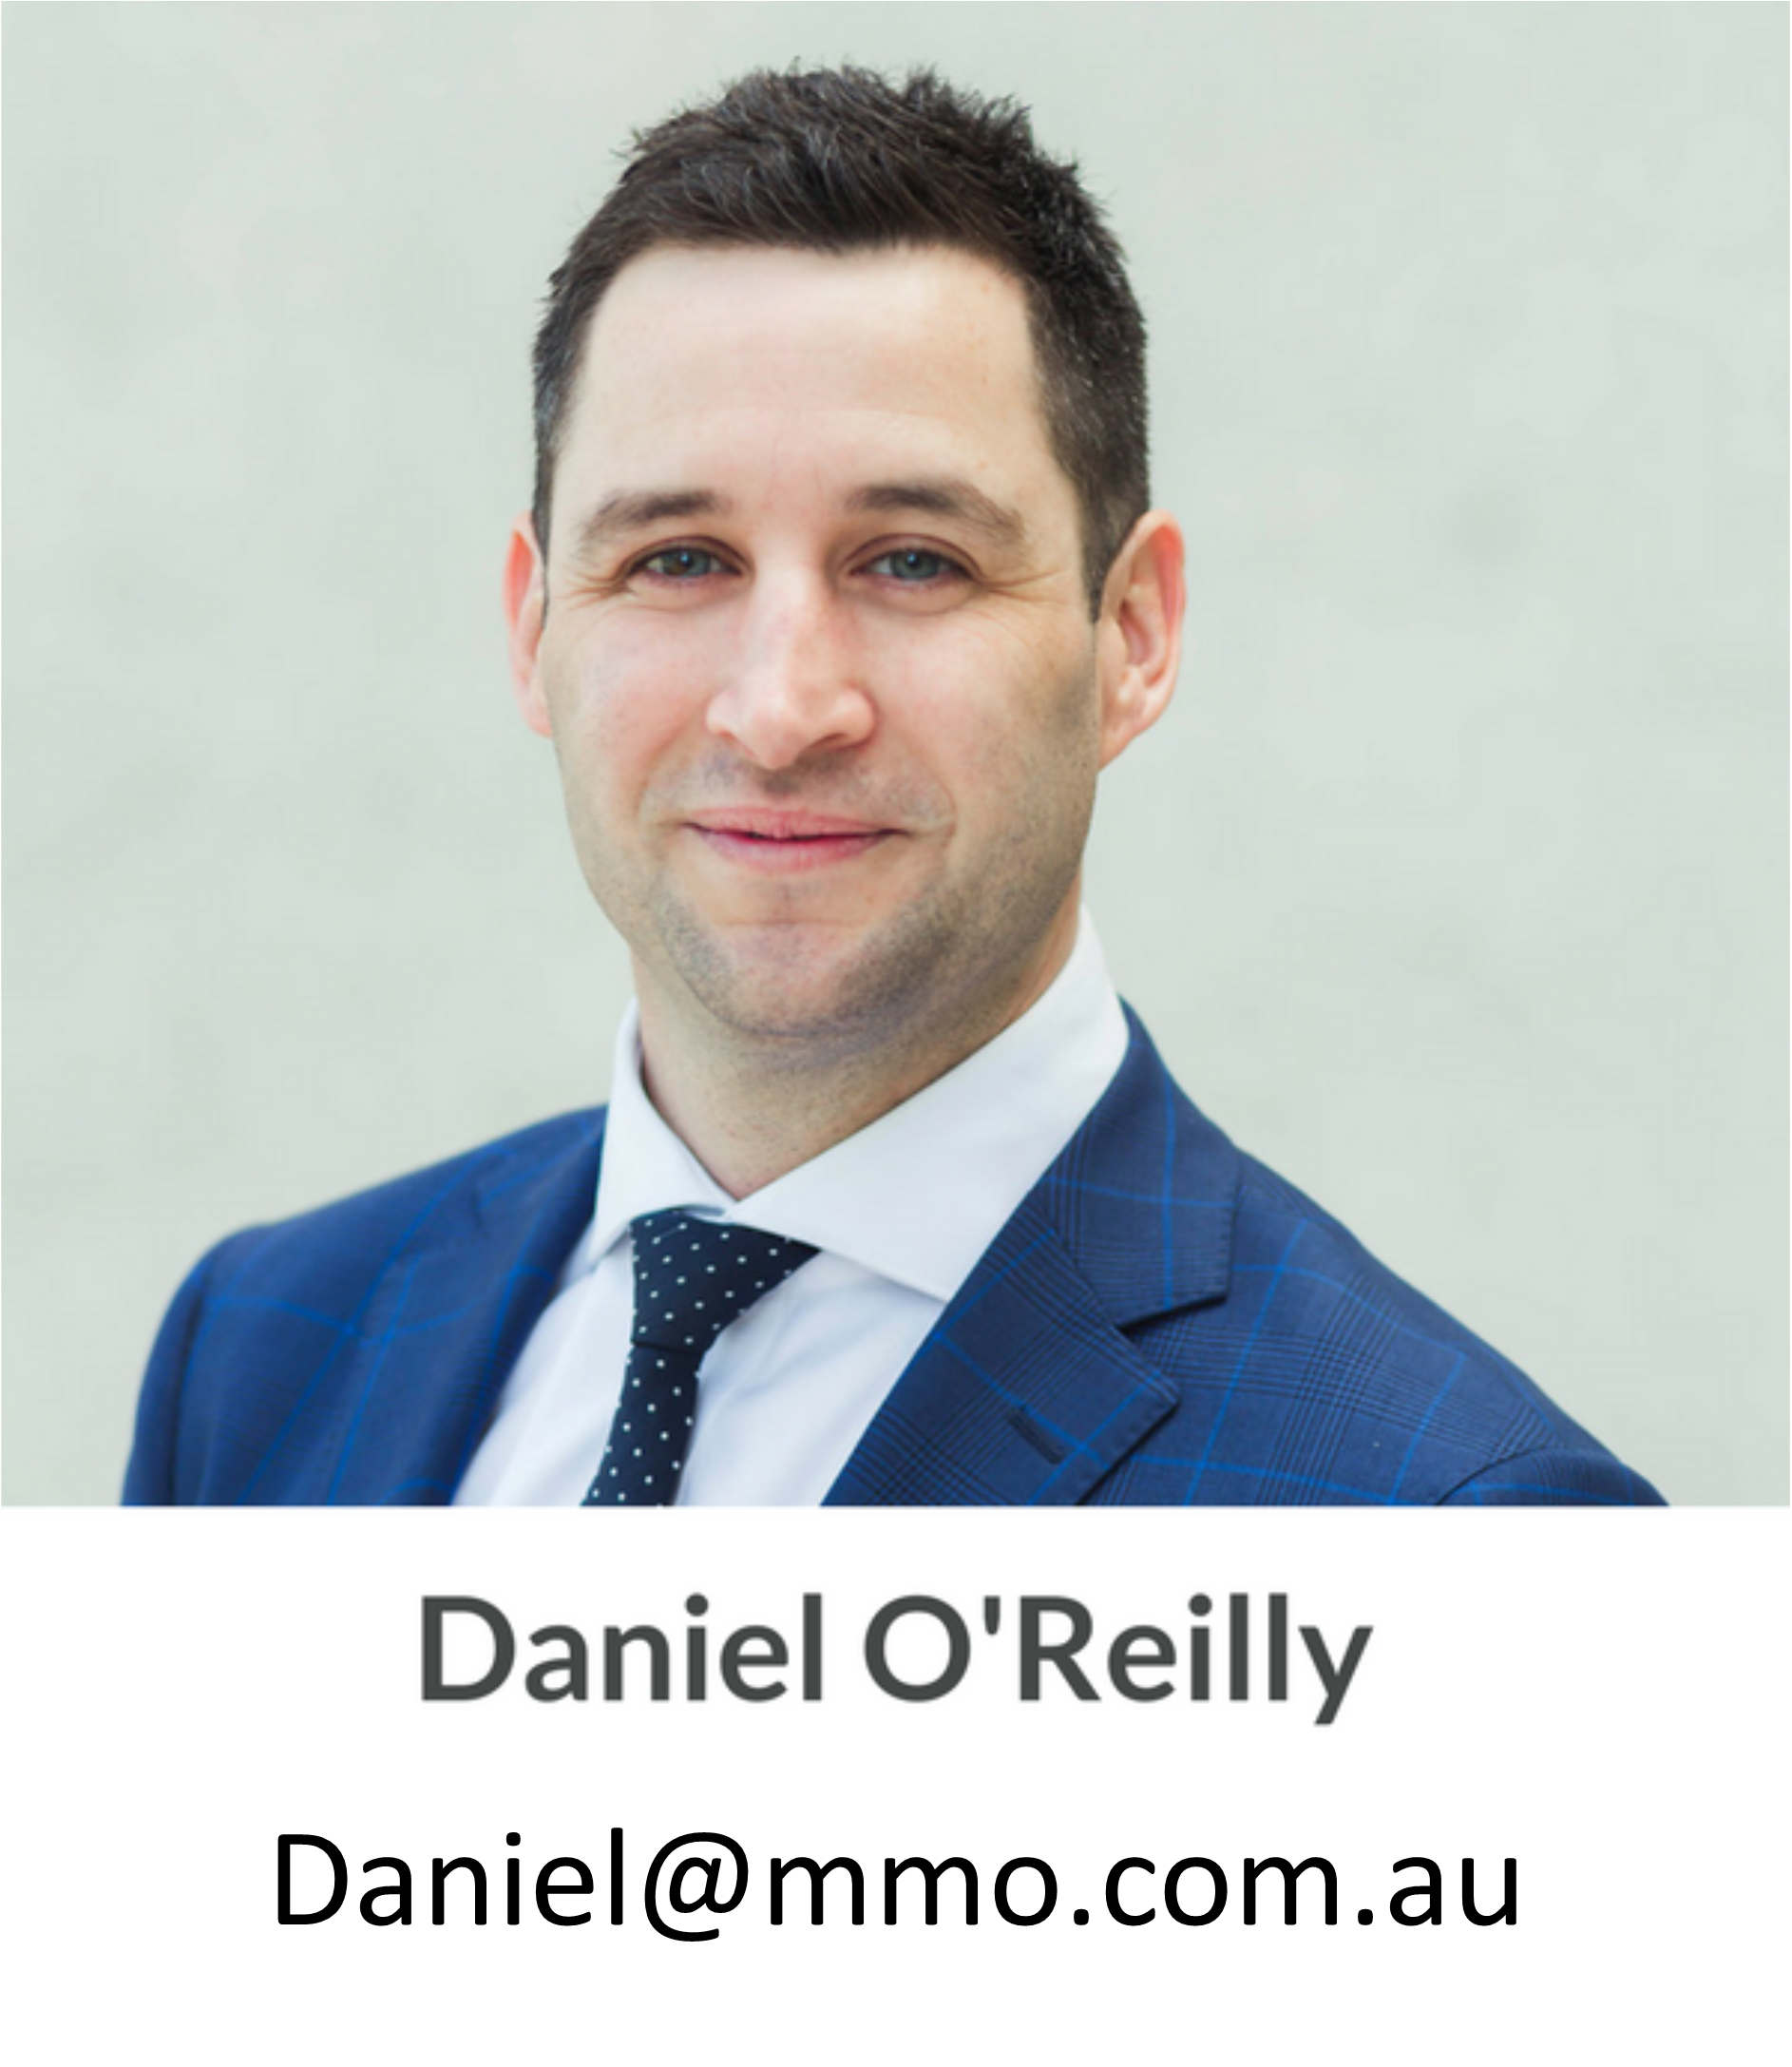 Daniel O'Reilly, MMO: Canberra's leading mortgage professionals